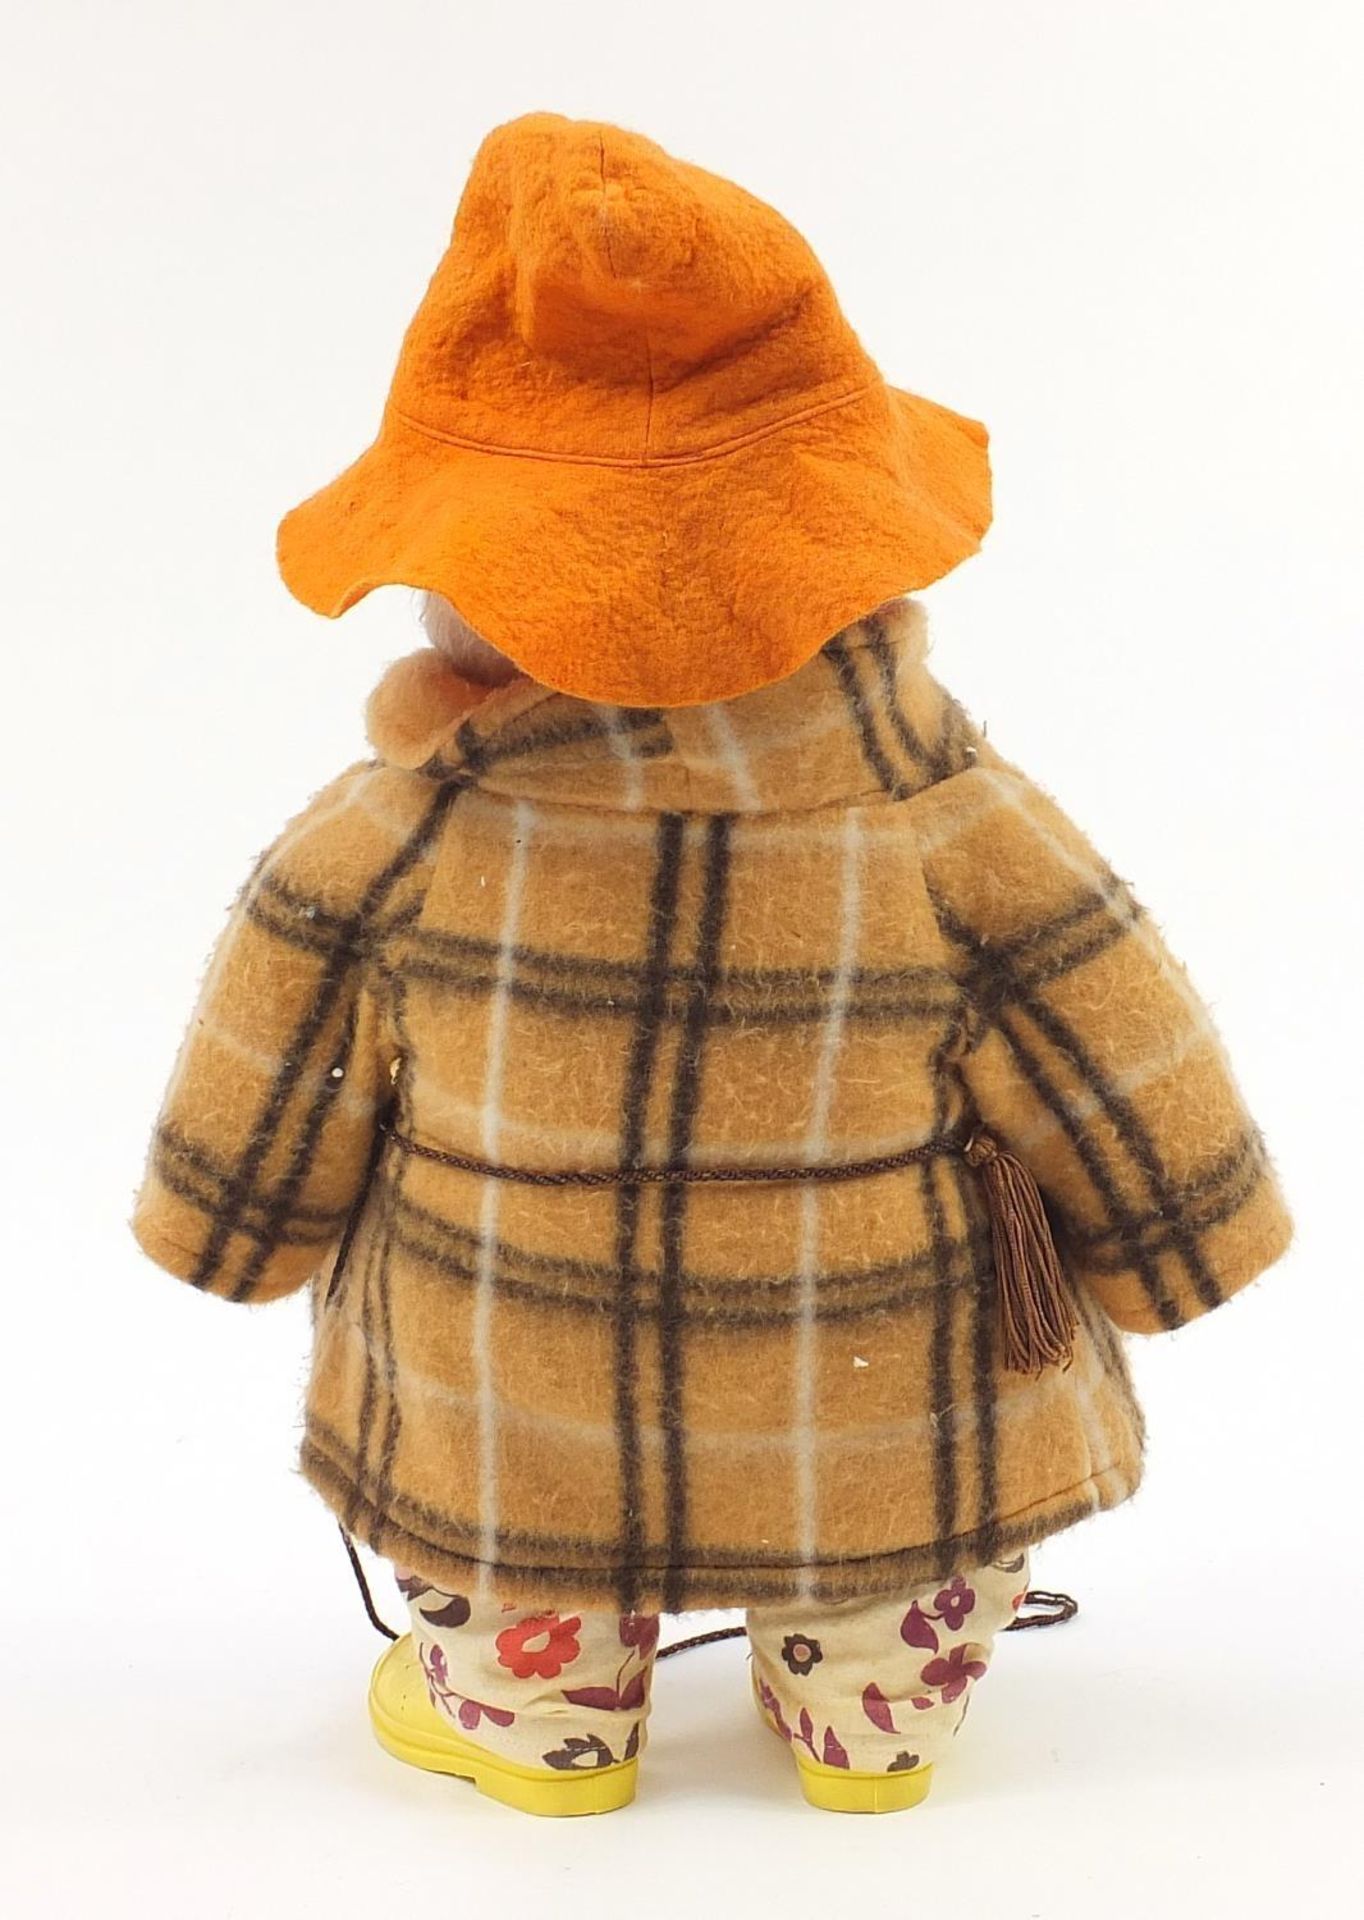 Vintage Gabrielle Design Paddington bear with yellow Wellington boots with spare clothing, 51cm high - Image 4 of 5